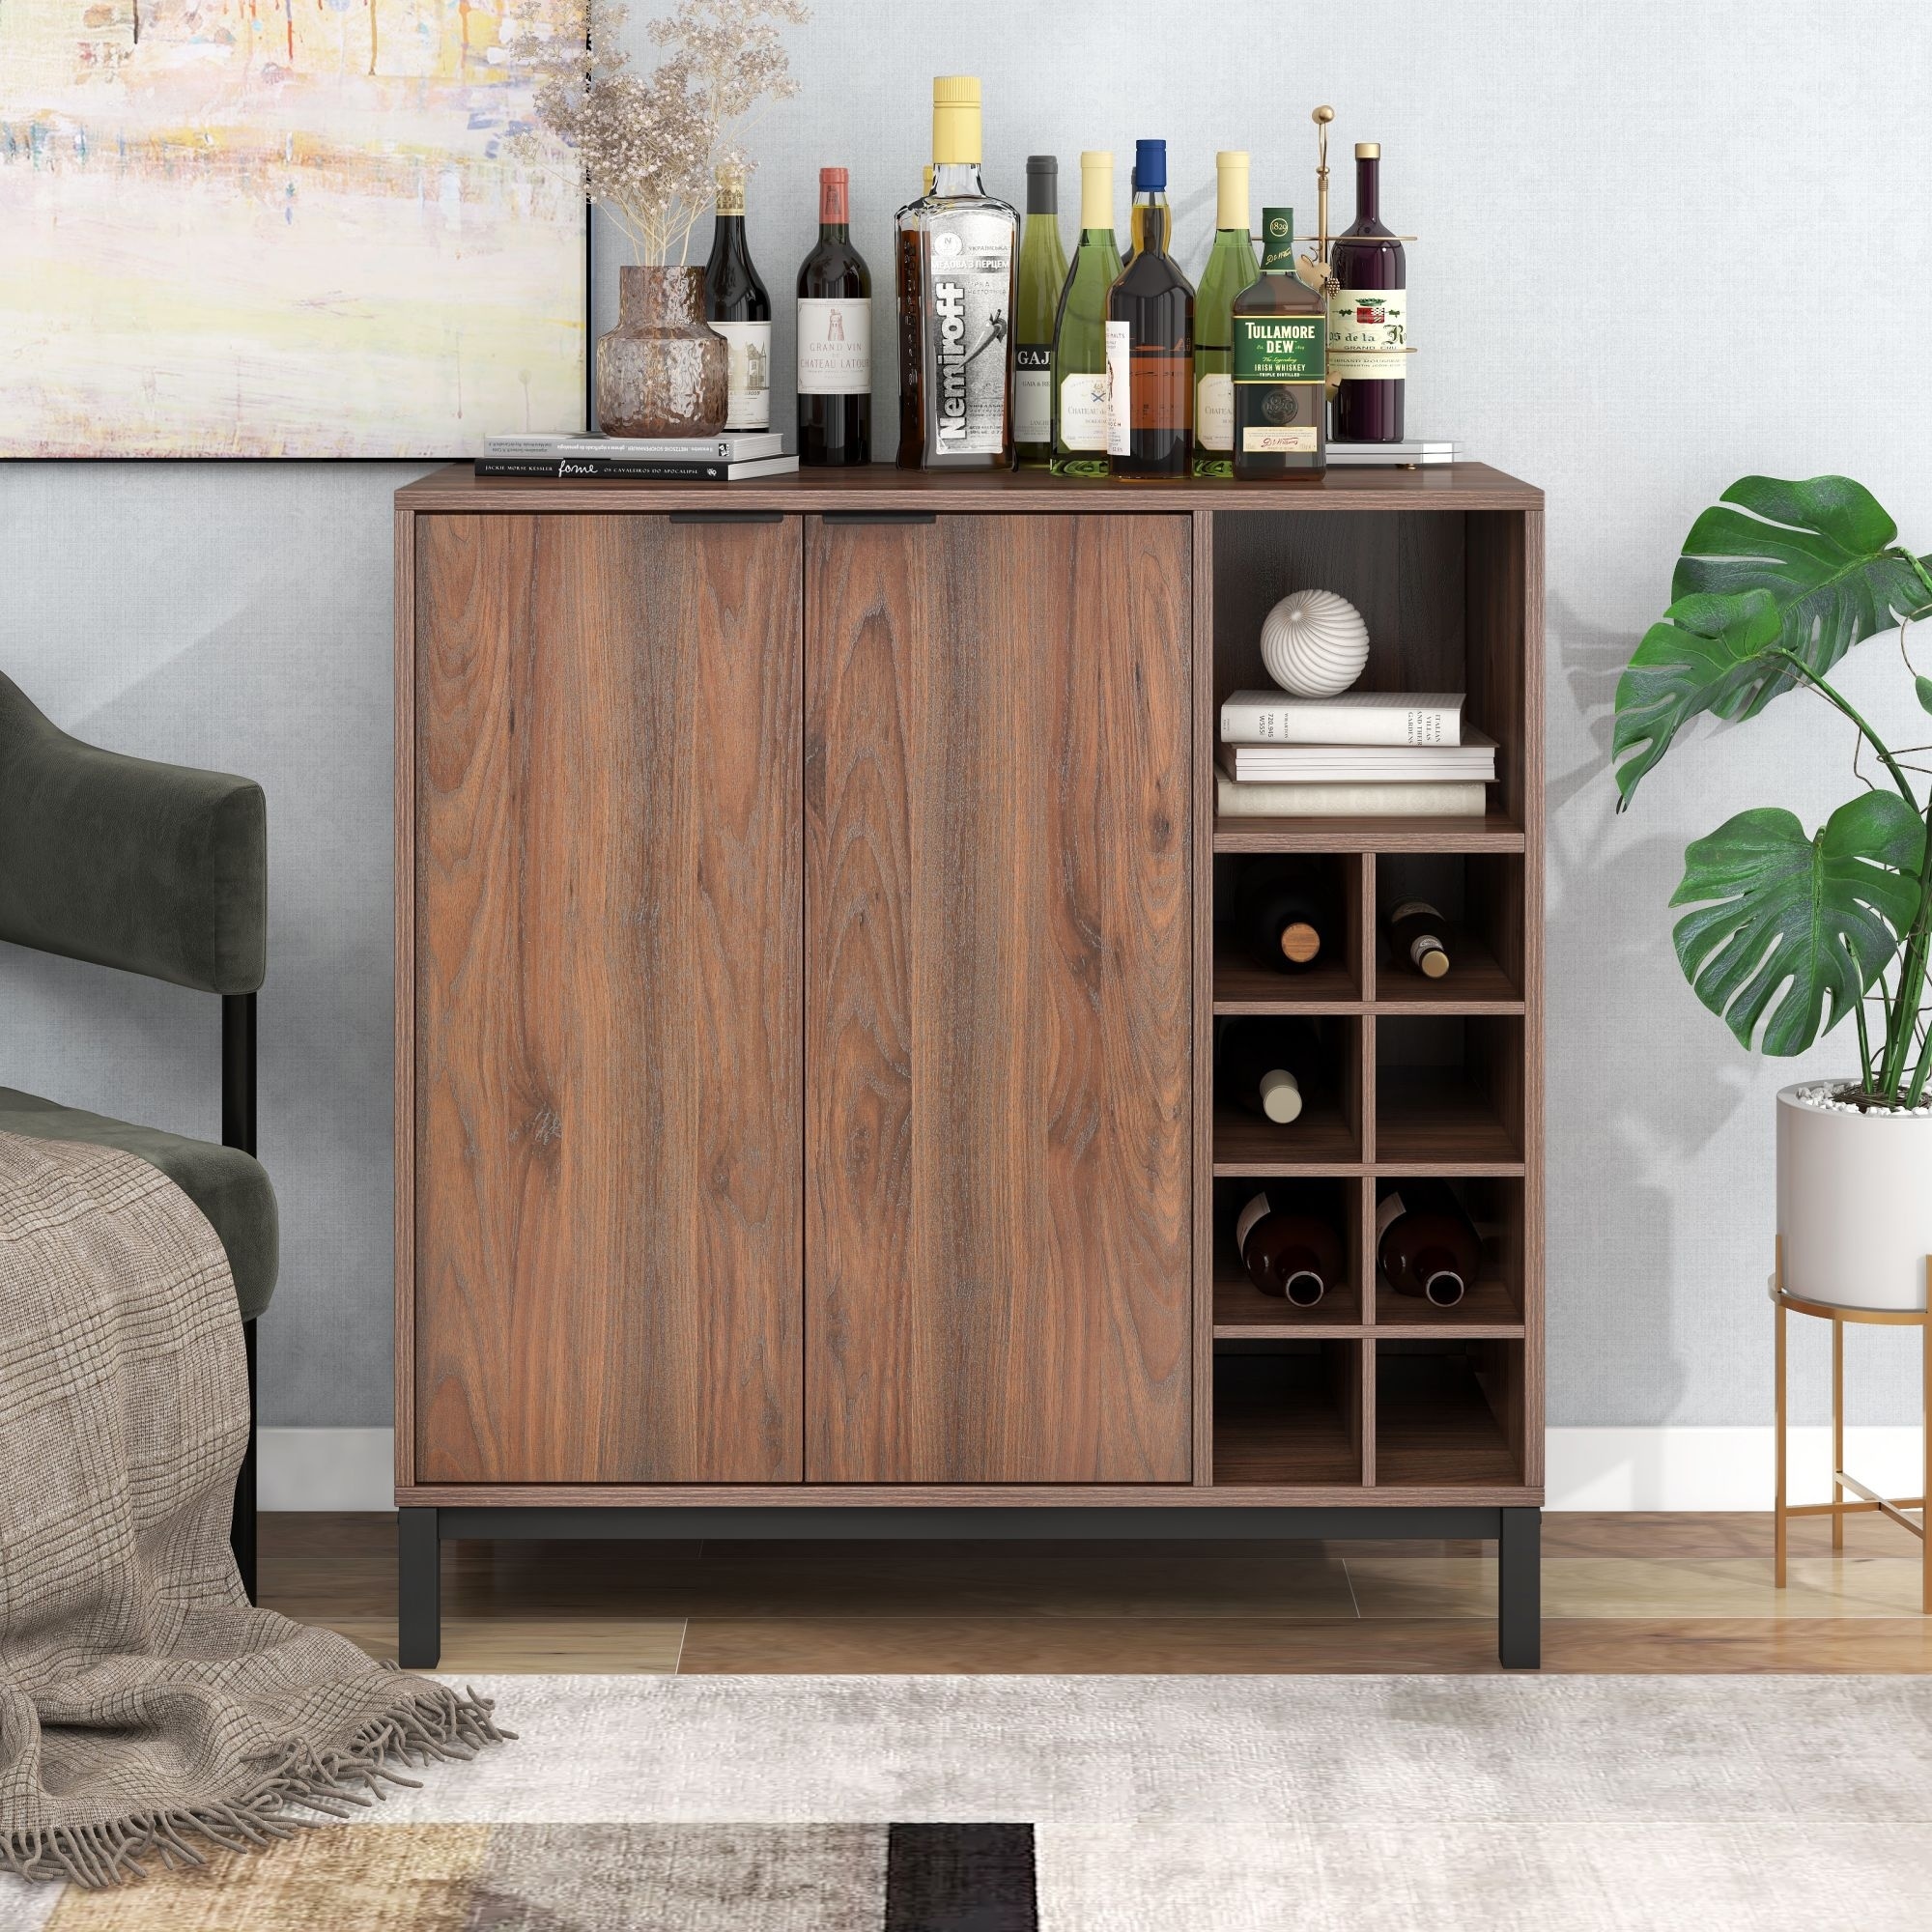 https://ak1.ostkcdn.com/images/products/is/images/direct/bbbc7bd96be22f93fad727e4b5033b46f7a15070/Sideboards-and-Buffets-With-Storage-Coffee-Bar-Cabinet.jpg